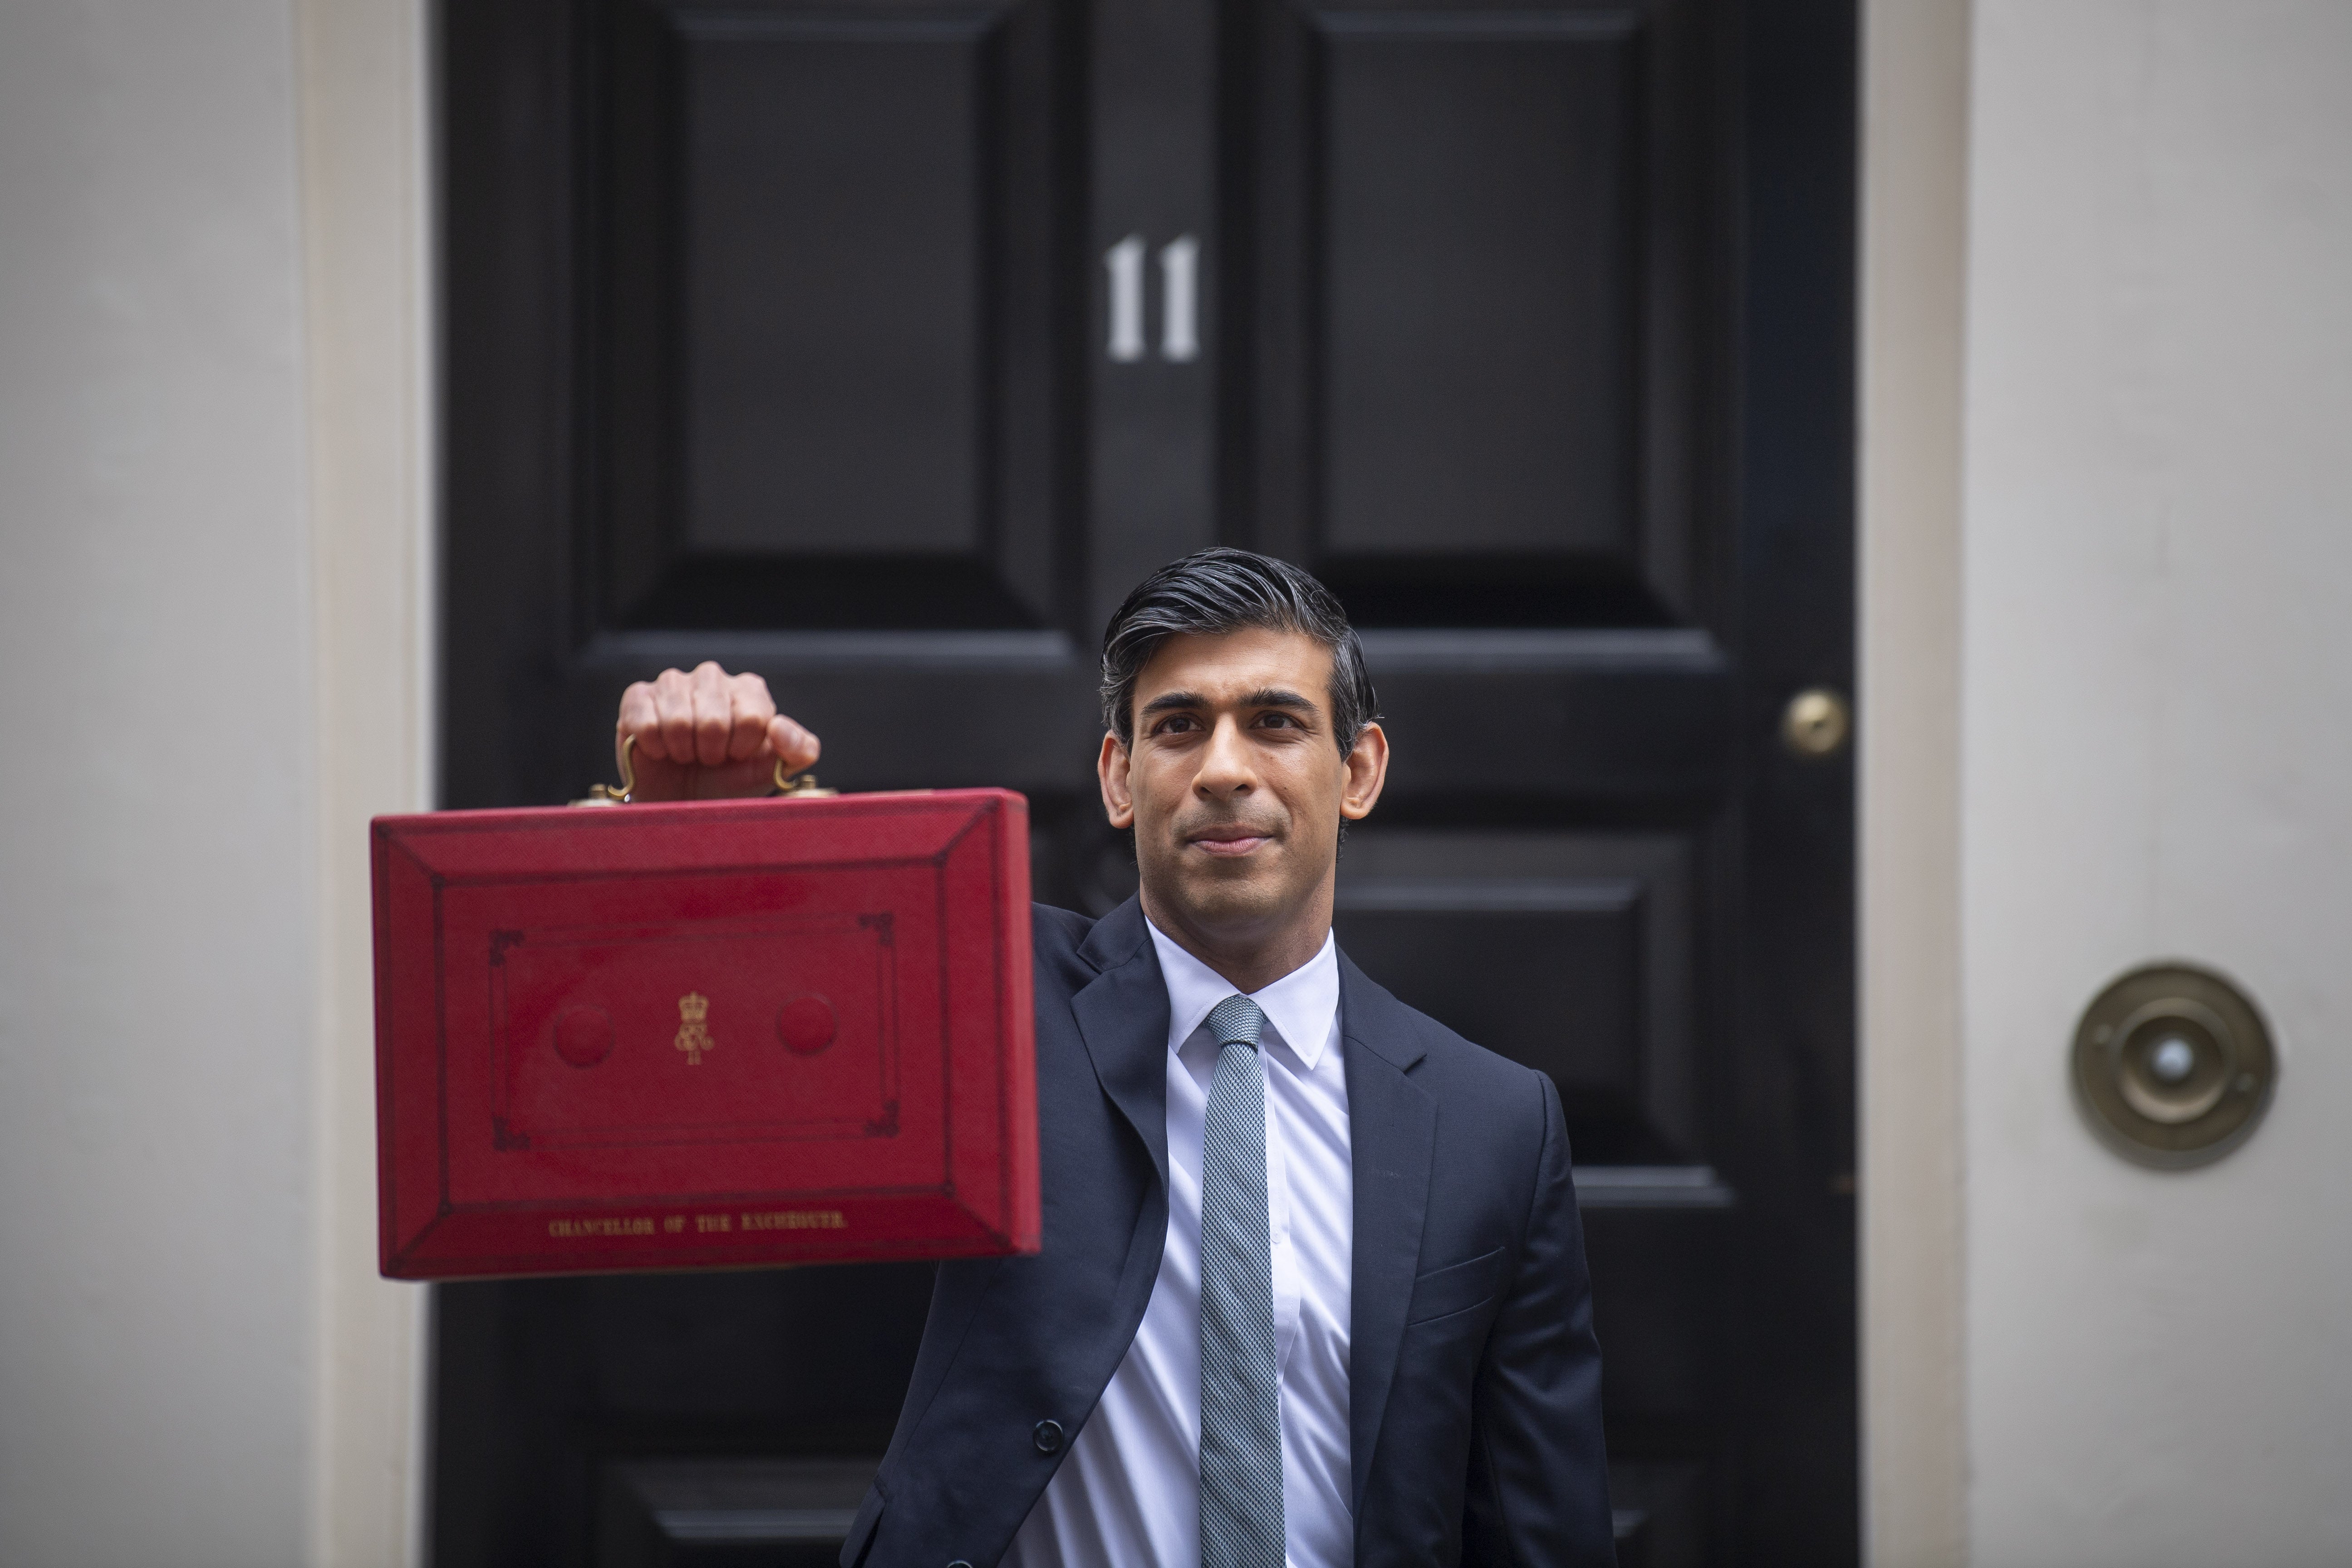 The Chancellor is expected to announce his Budget on 27 October